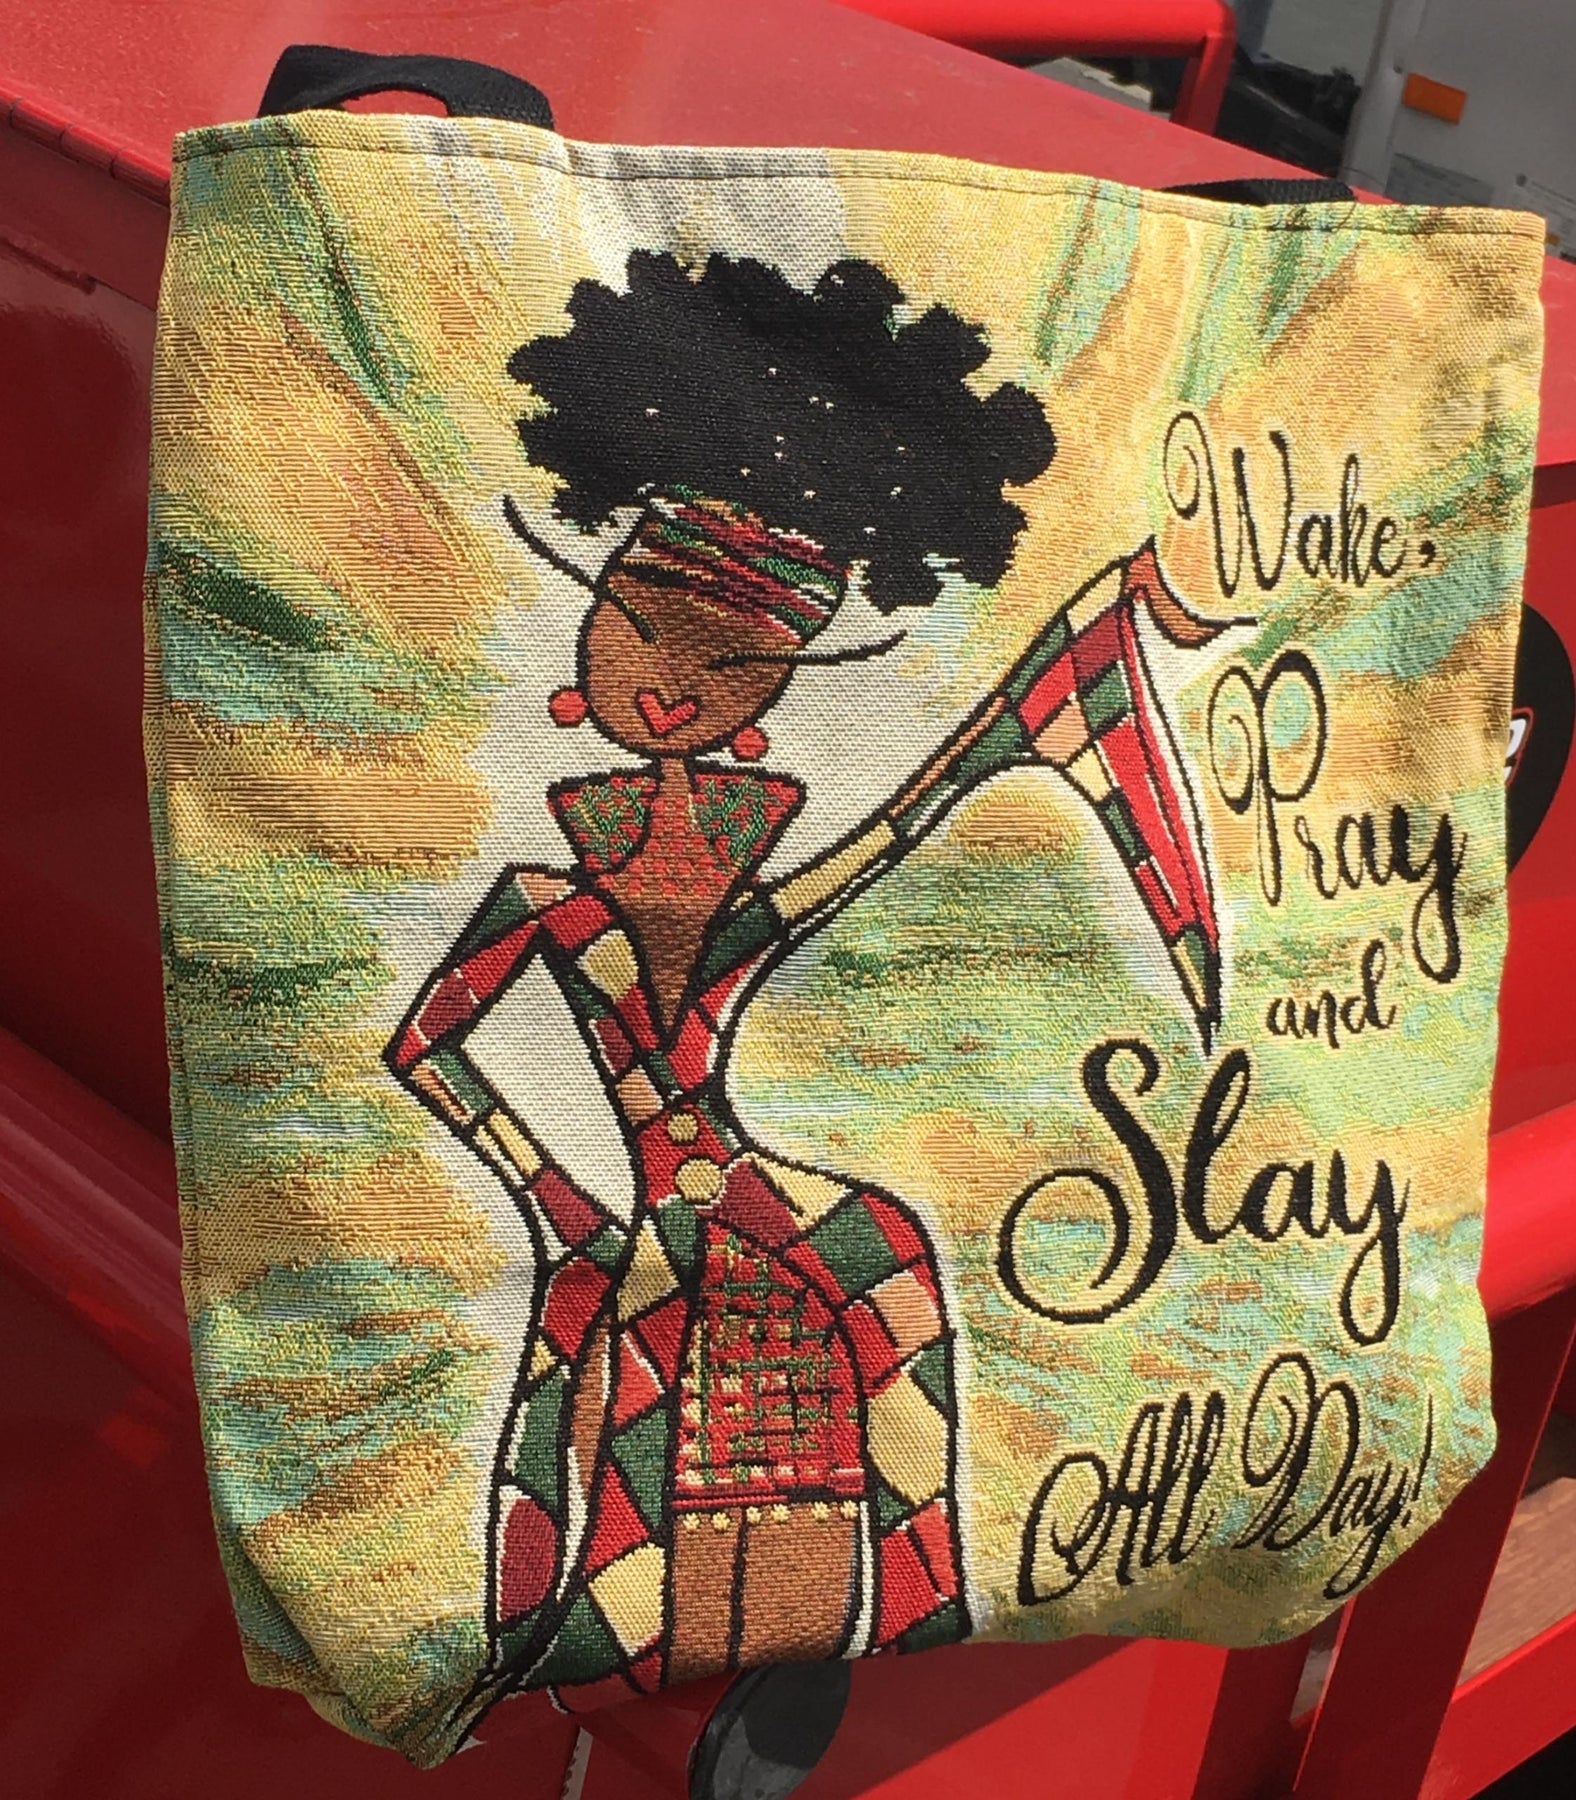 2 of 3: Wake, Pray and Slay All Day Woven Tapestry Tote Bag by Kiwi McDowell